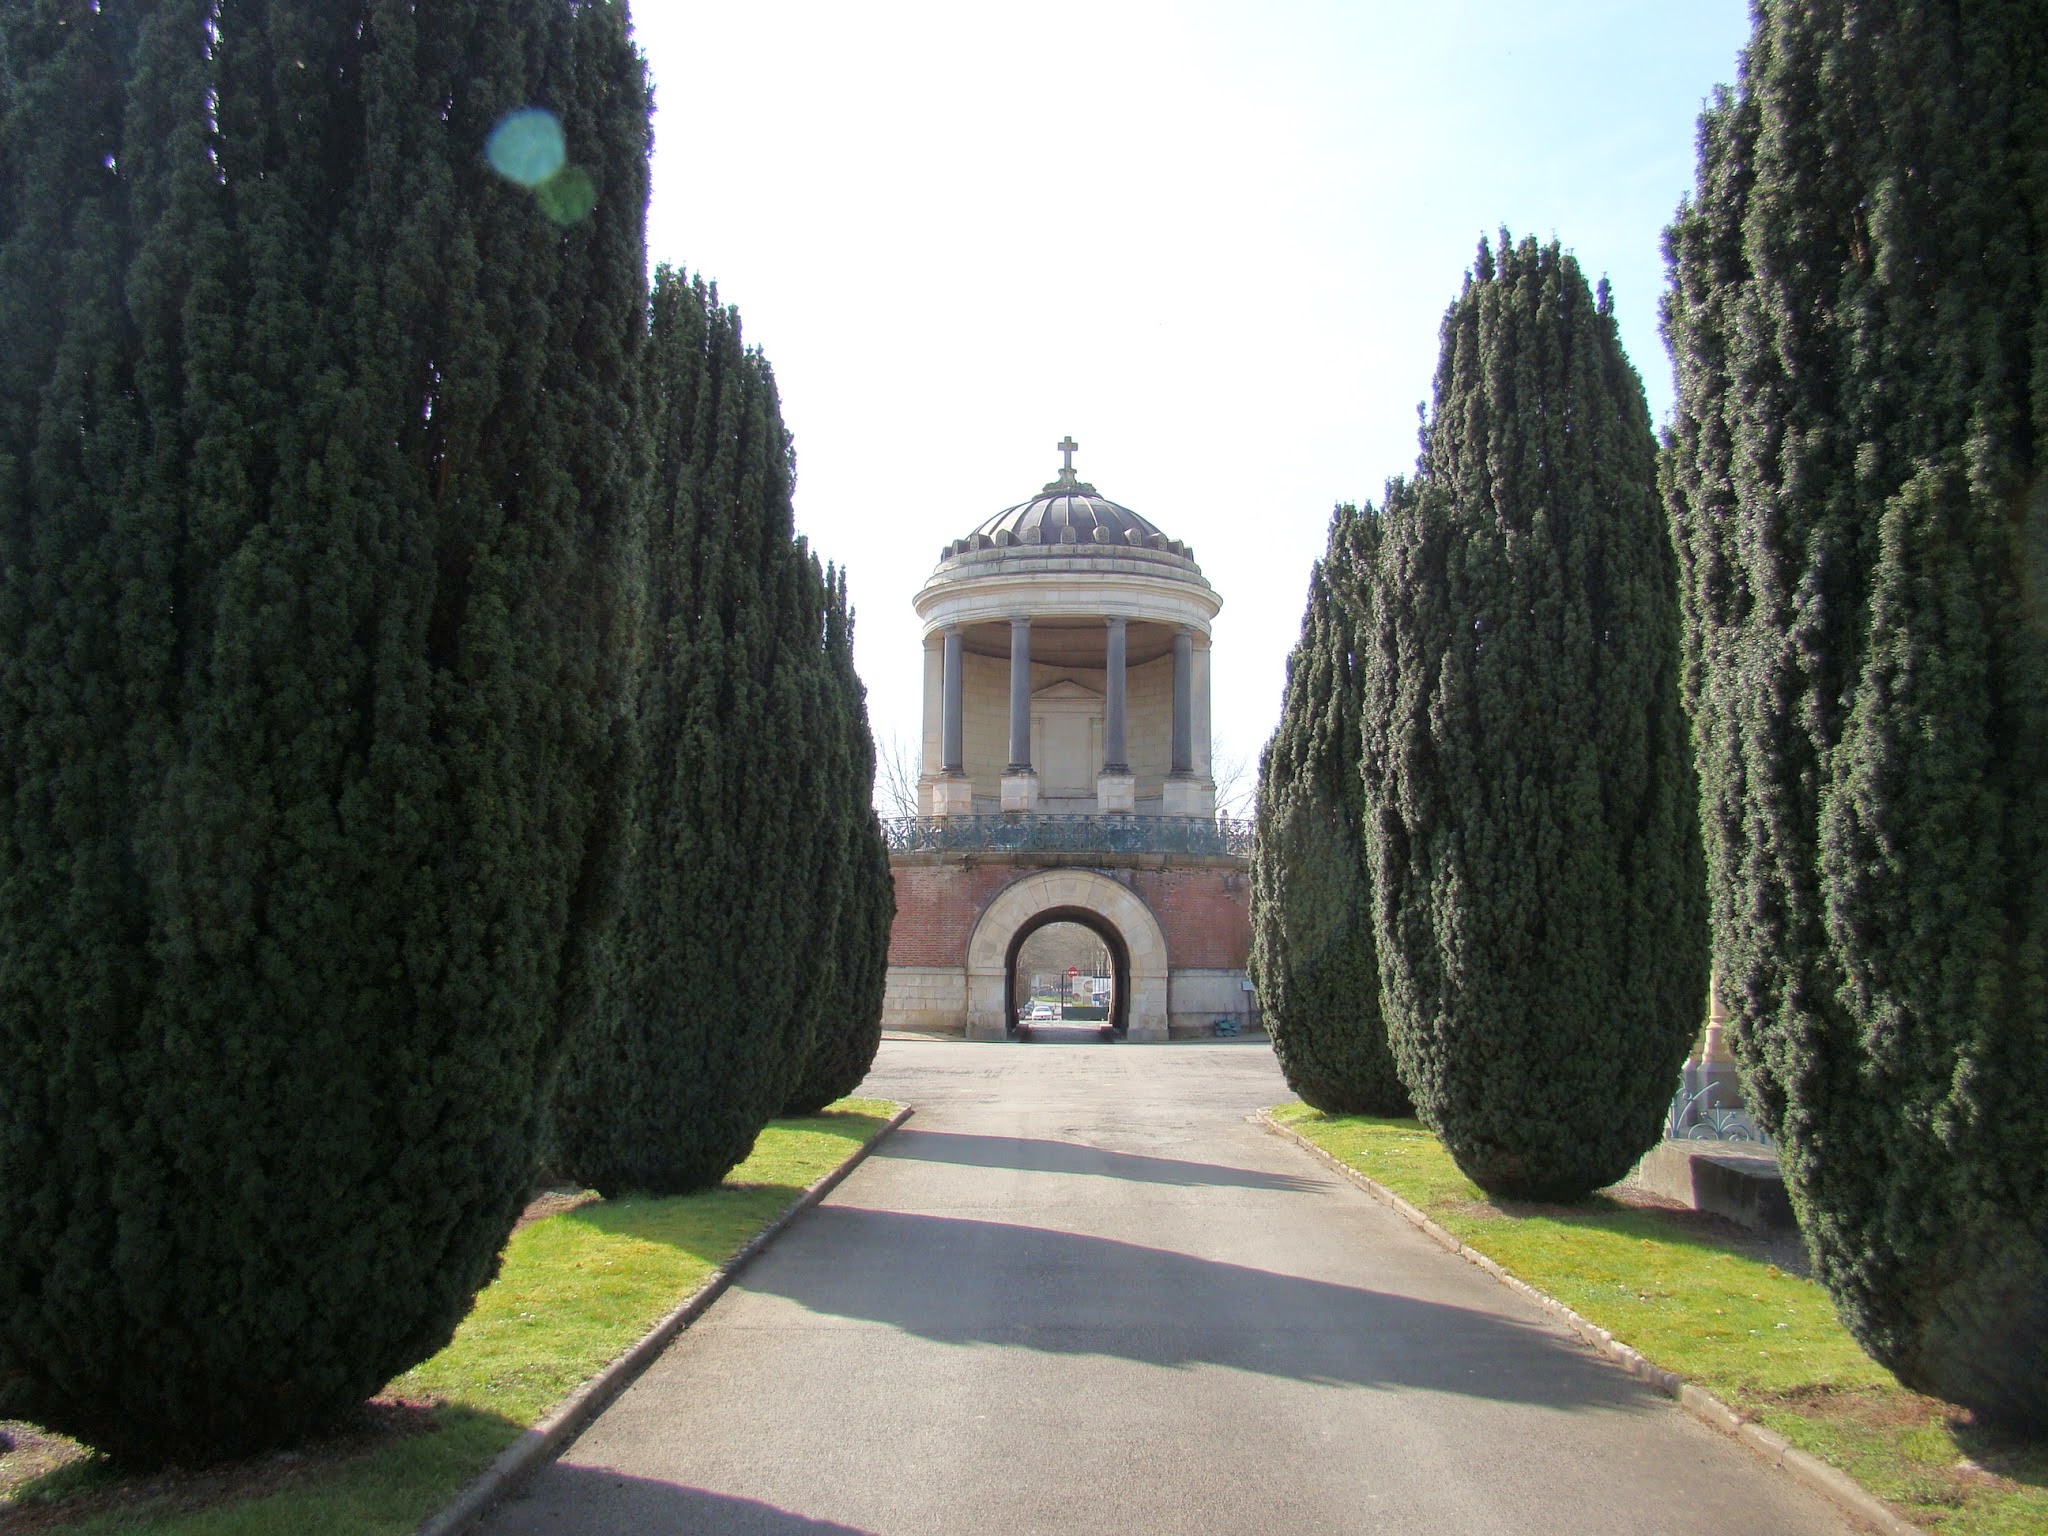 Northern Cemetery (Rennes, France)